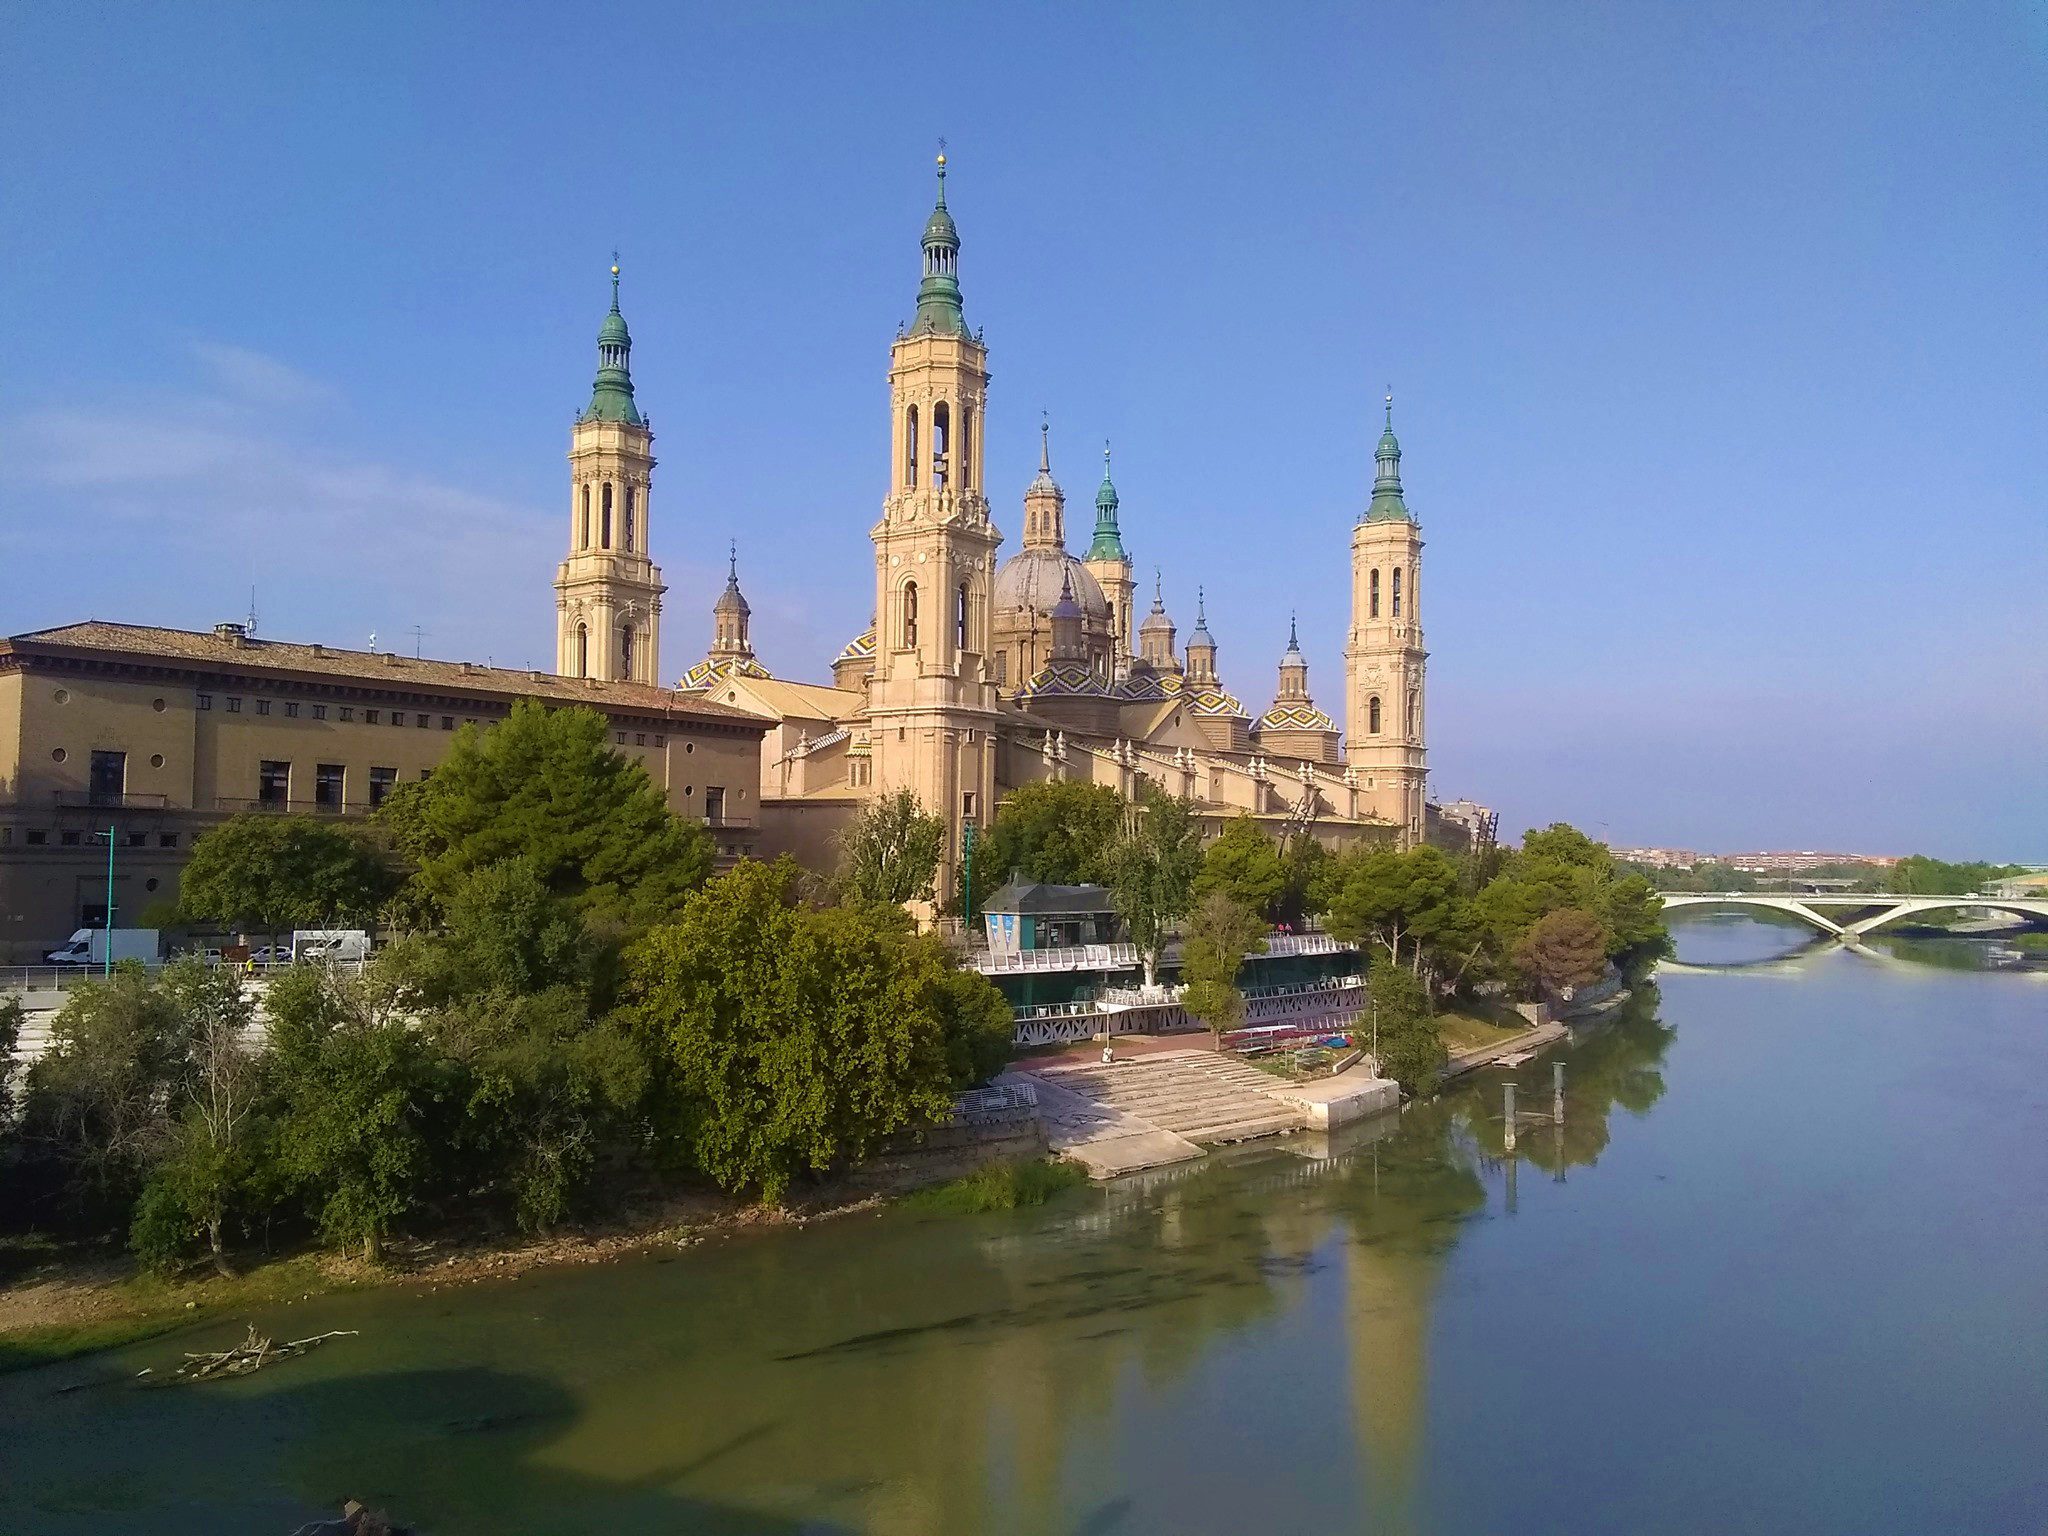 A view of the Pilar Cathedral, taken from the Stone Bridge in Zaragoza, Spain